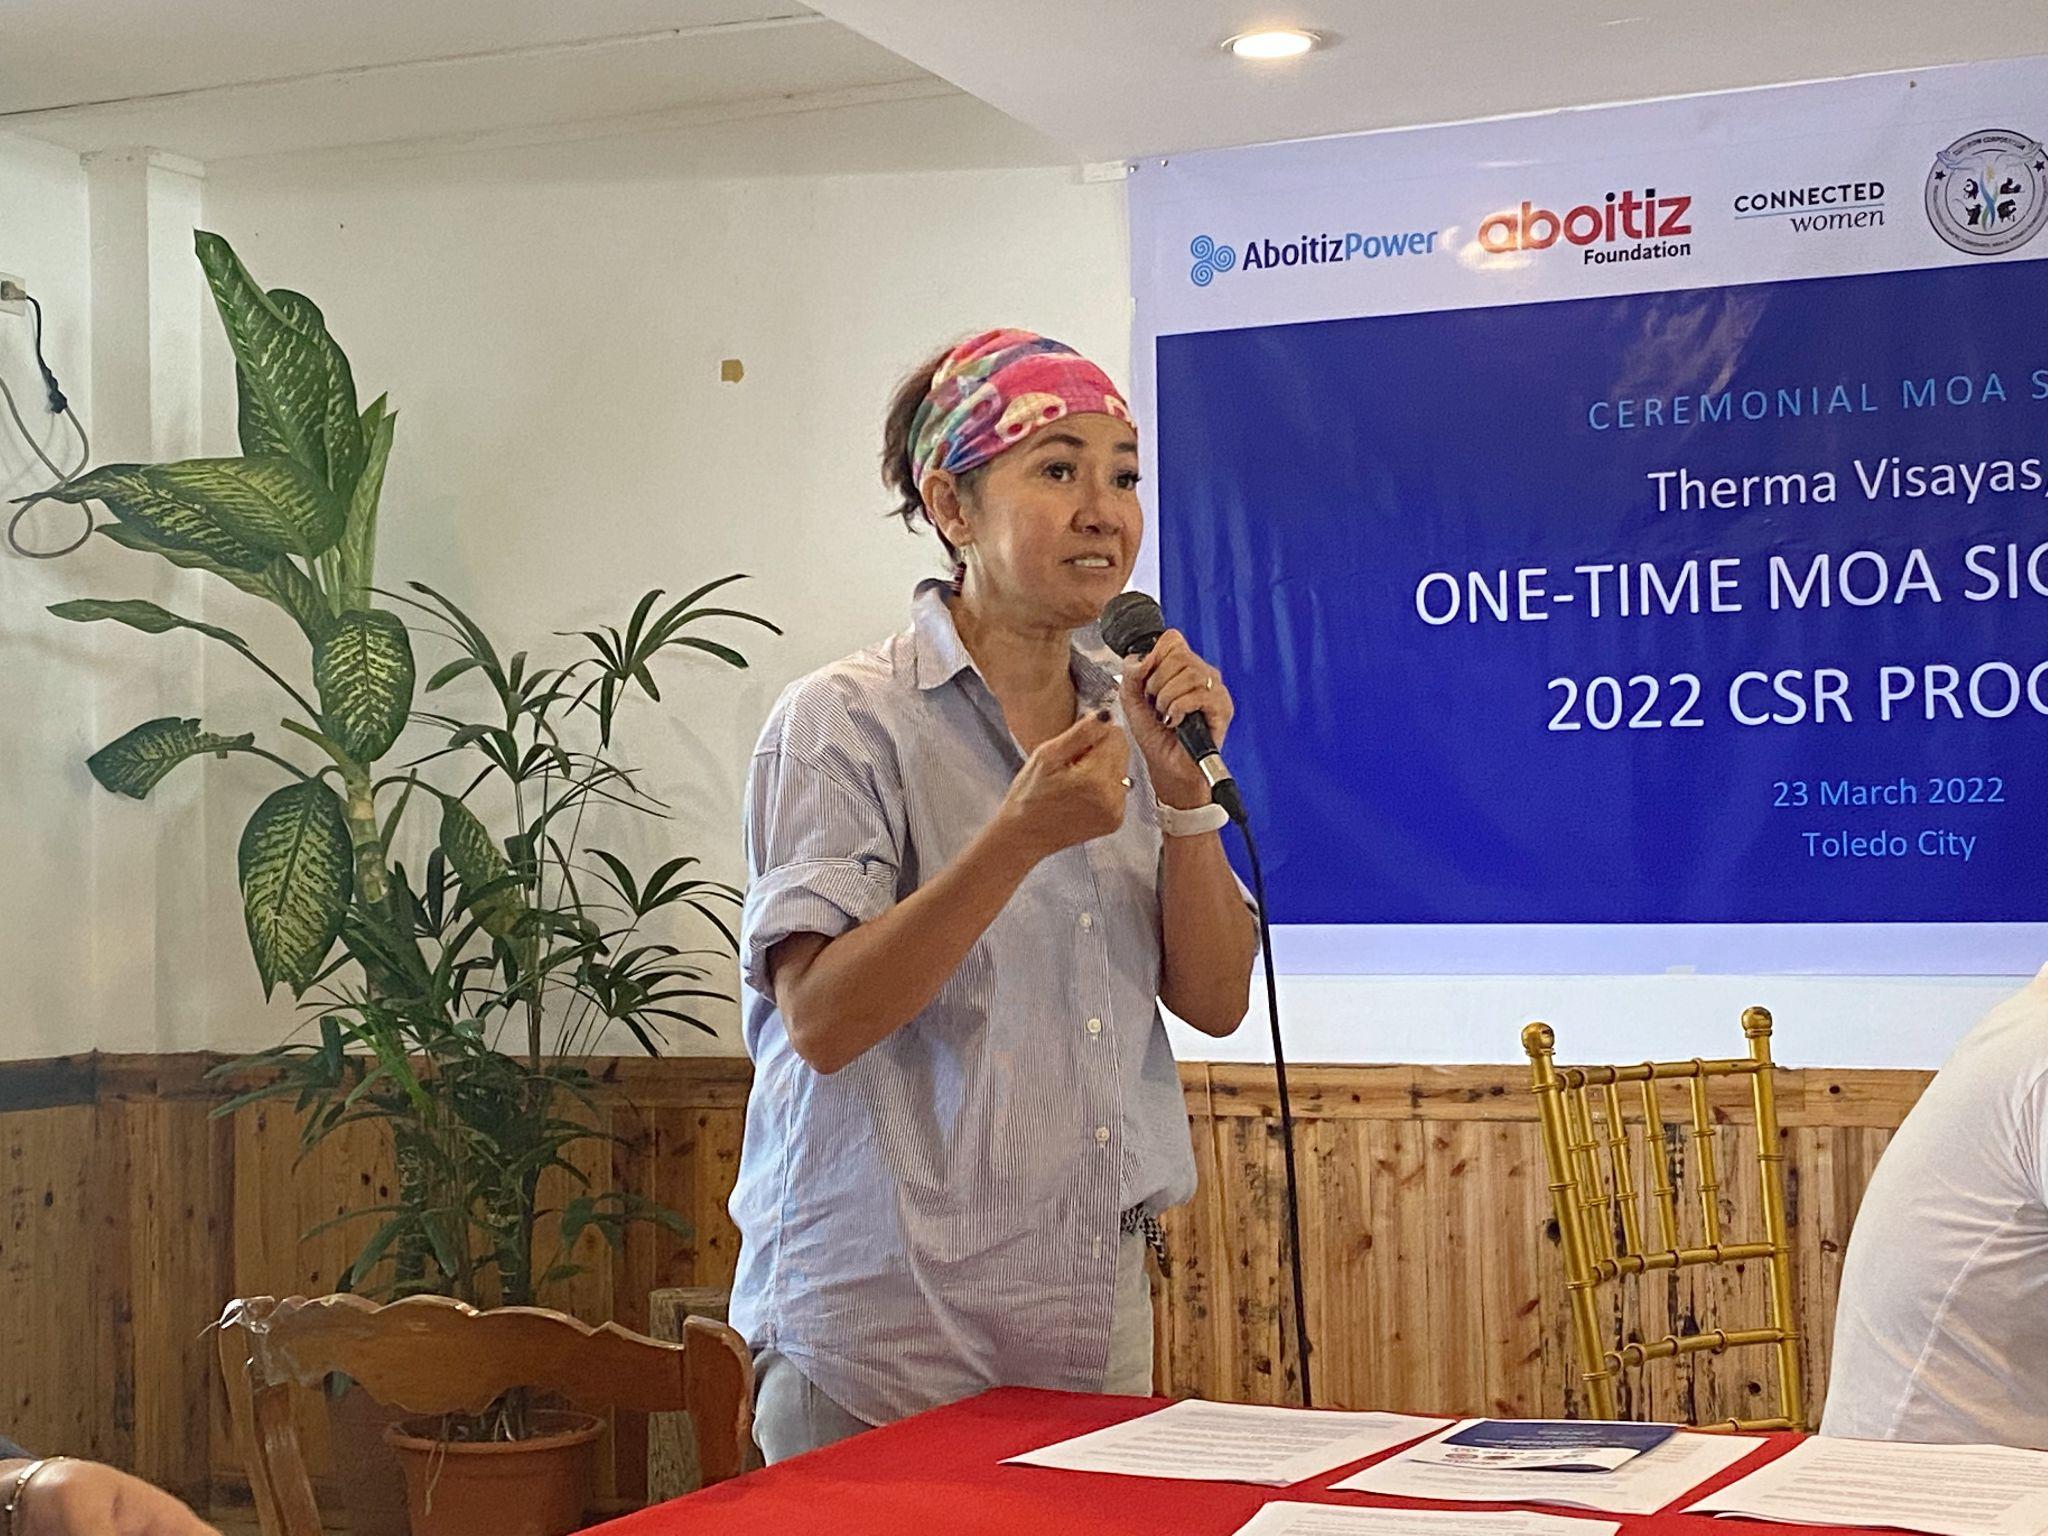 AboitizPower, Connected Women team up to teach AI skills to 60 Cebuanas